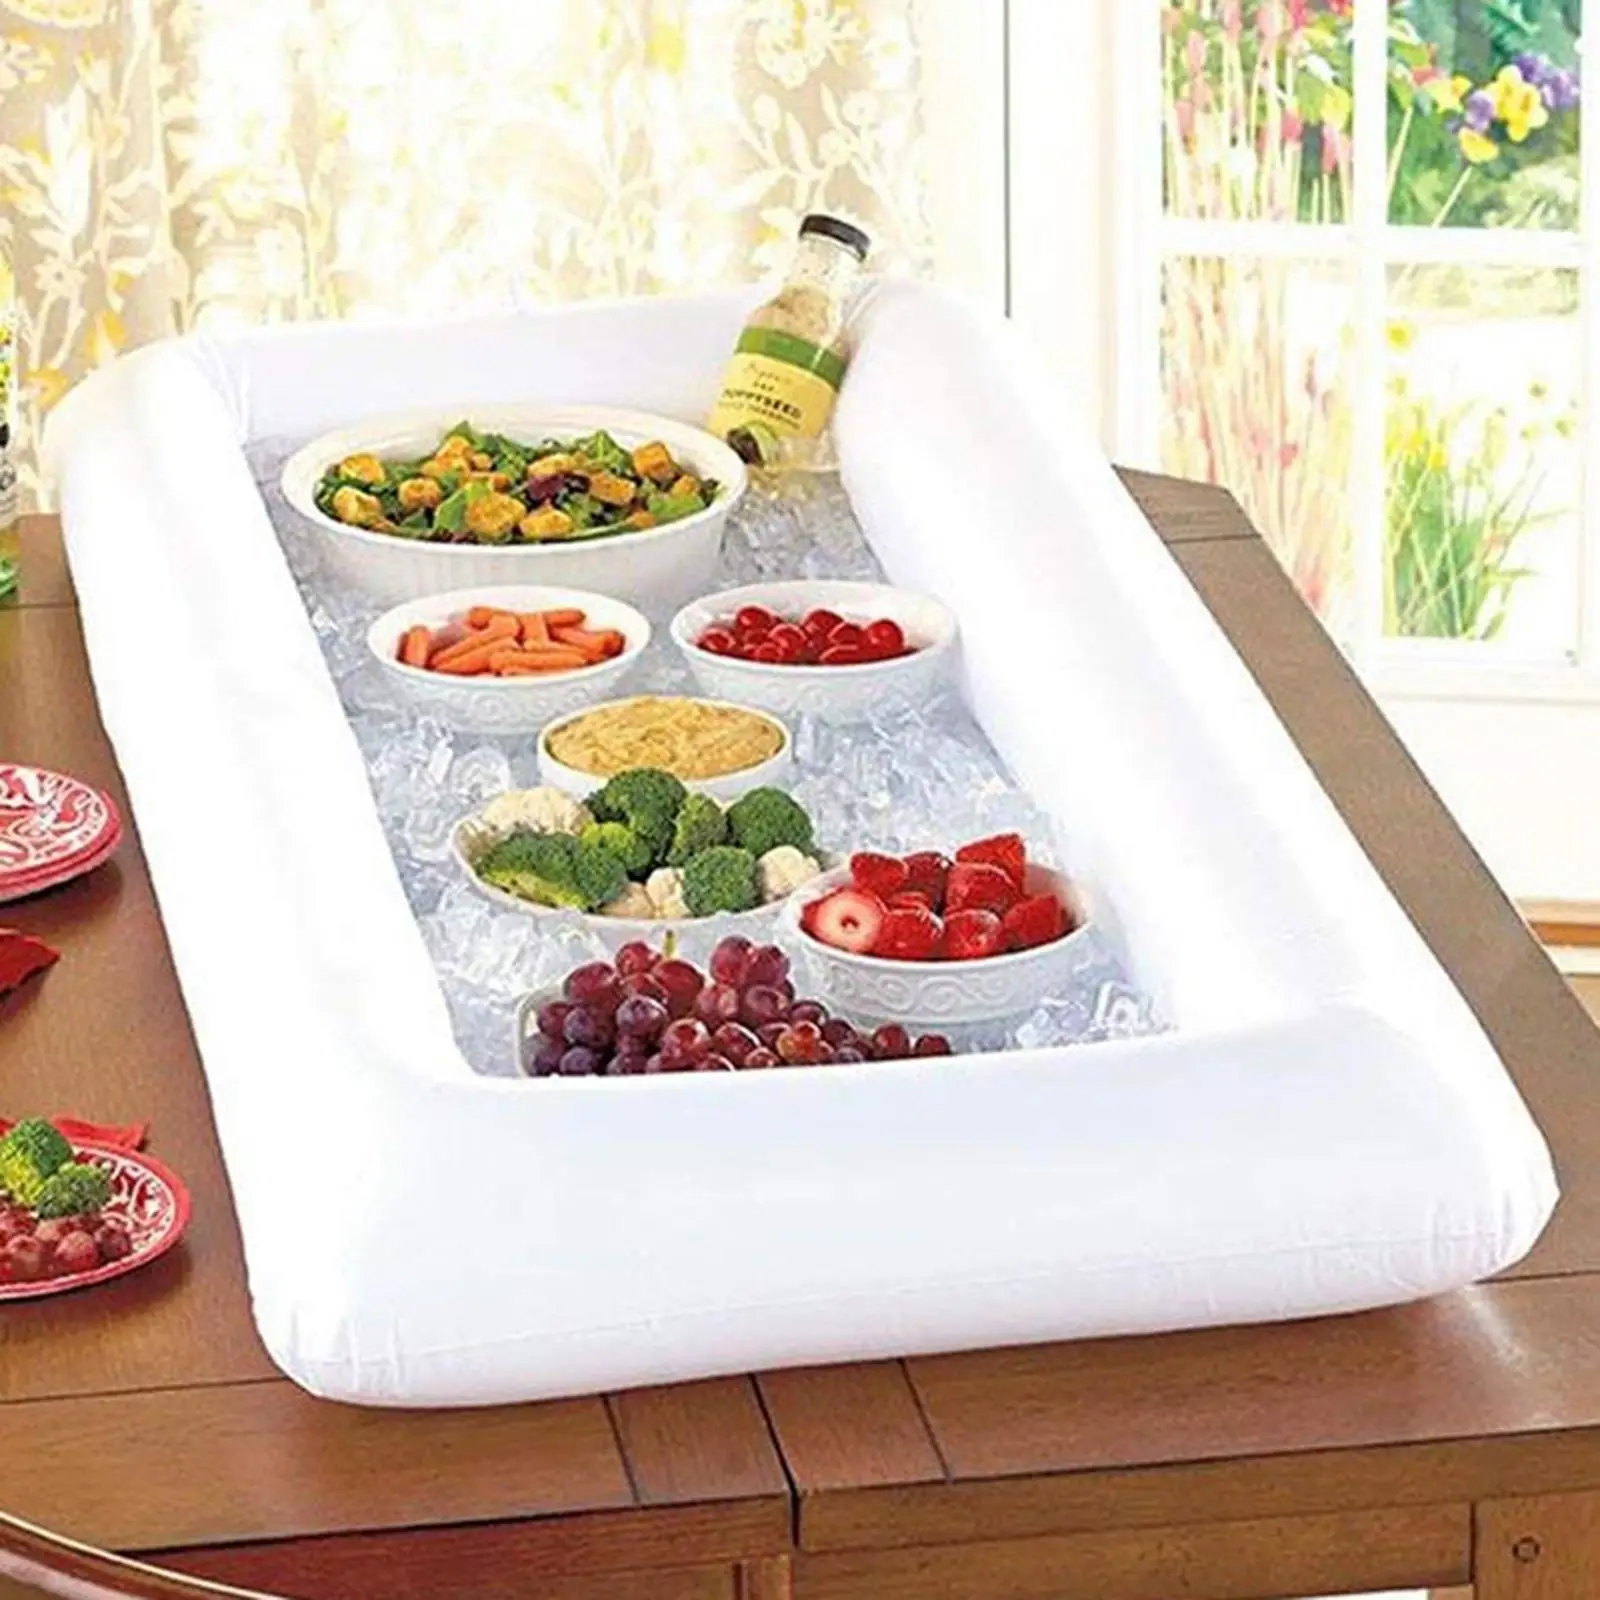 Novelty Pool Float Inflatable Serving Bar Salad Ice Food Tray Table Camping